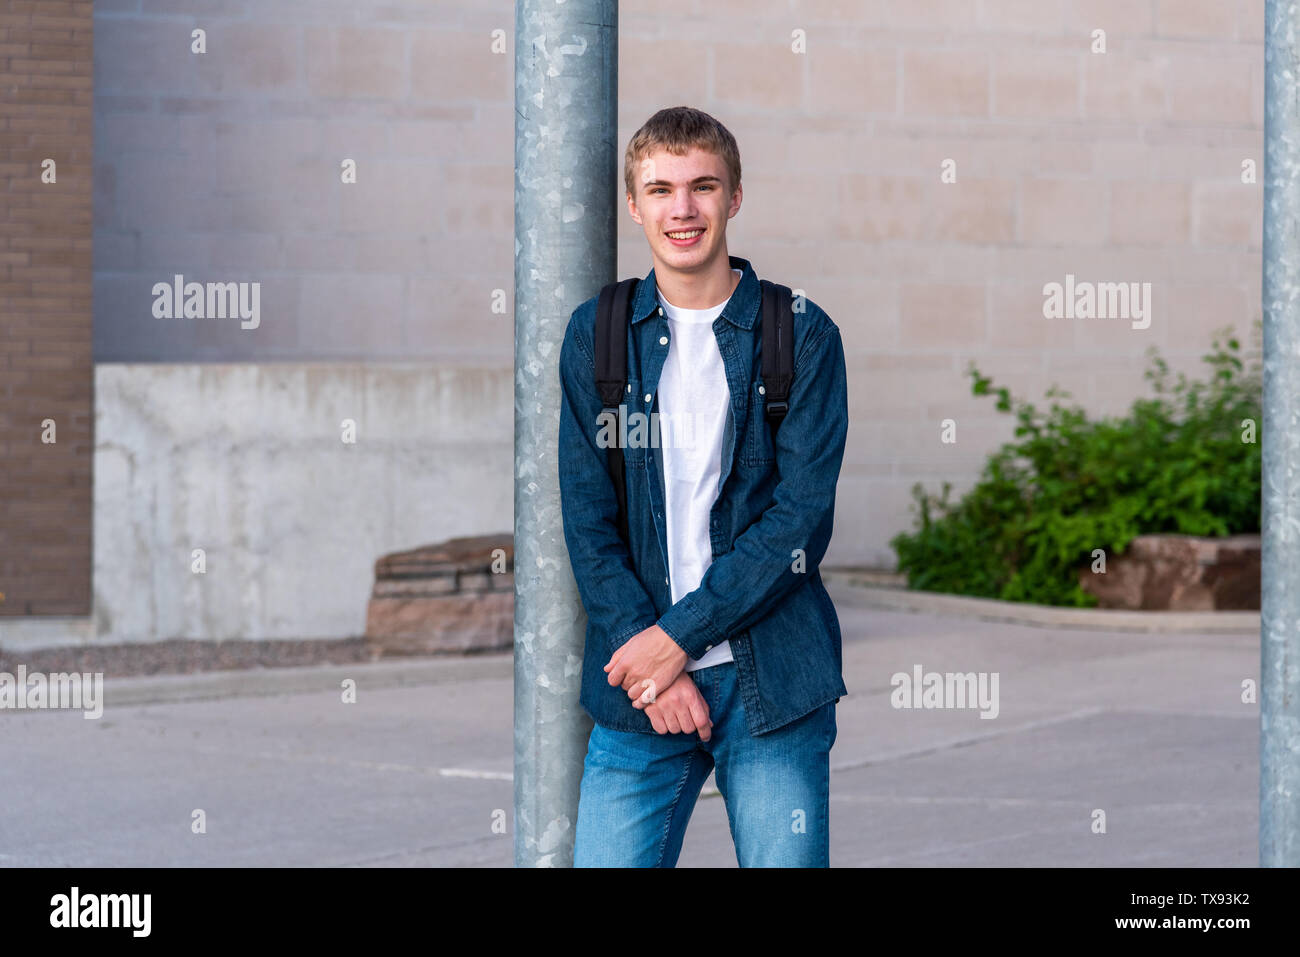 Happy teenager standing in front of the entrance to his high school. Stock Photo